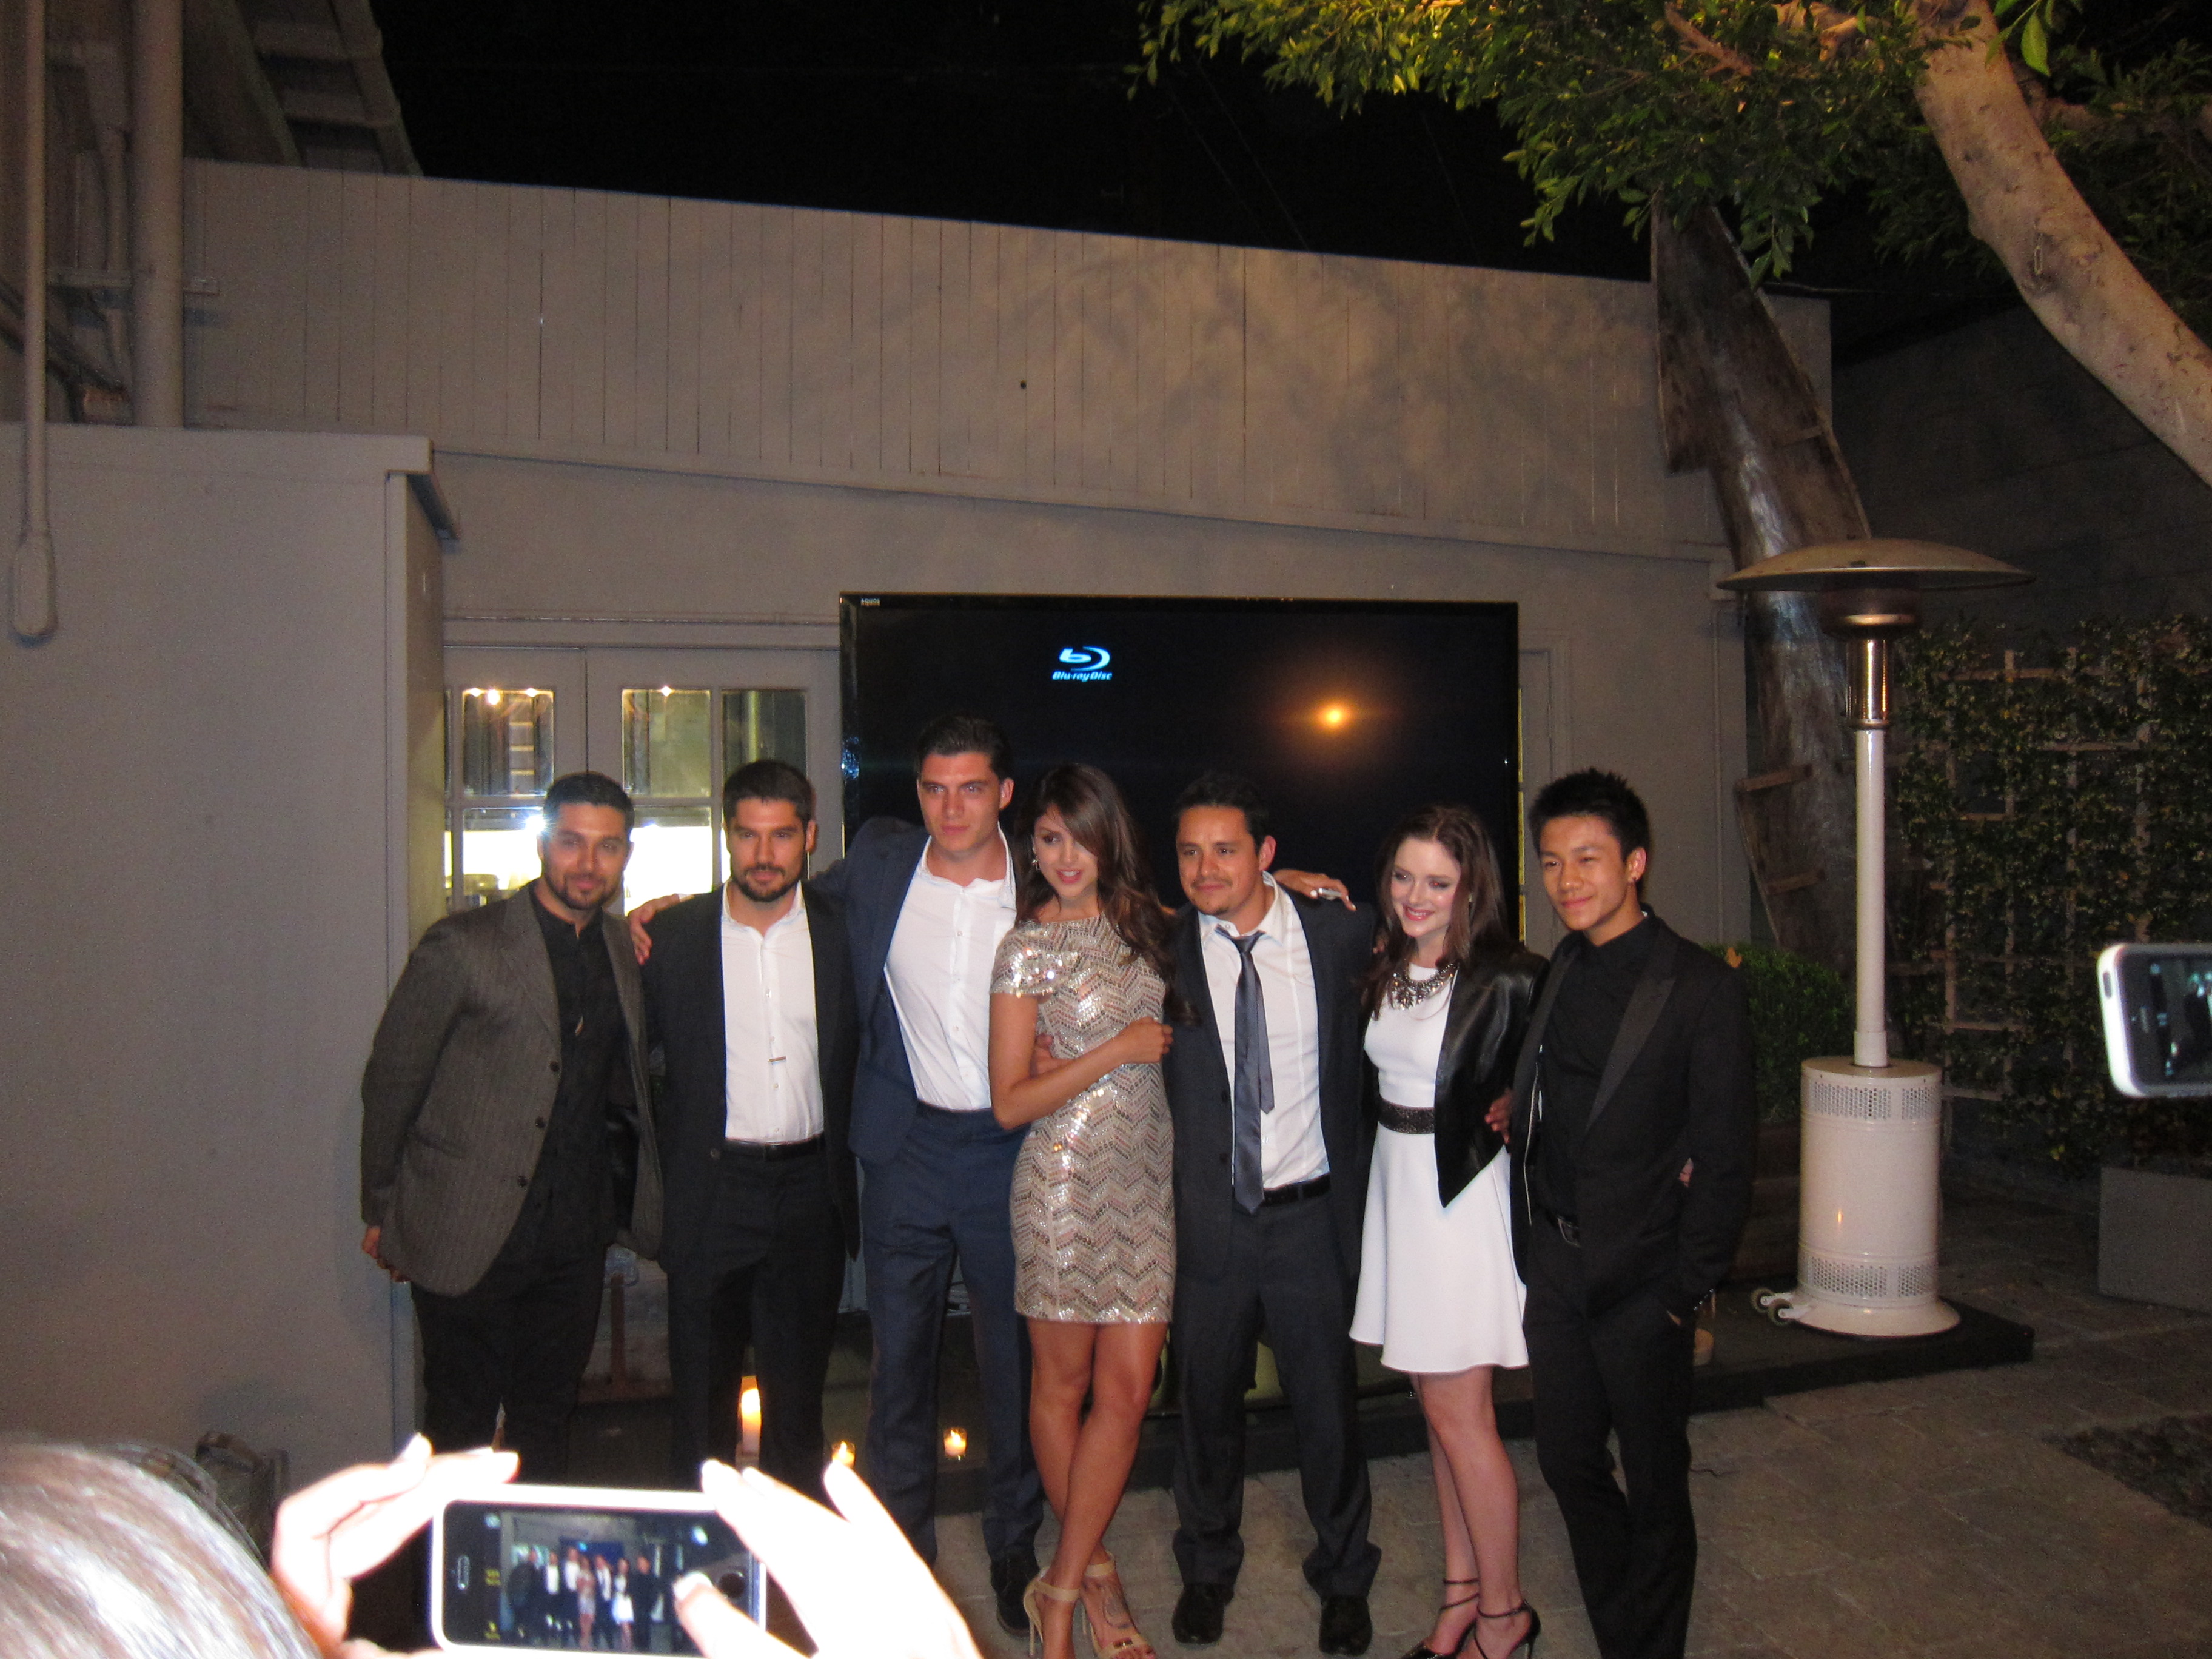 Brandon Soo Hoo with Cast of From Dusk Till Dawn (2014) at Mirax Screening After Party on May 20, 2014